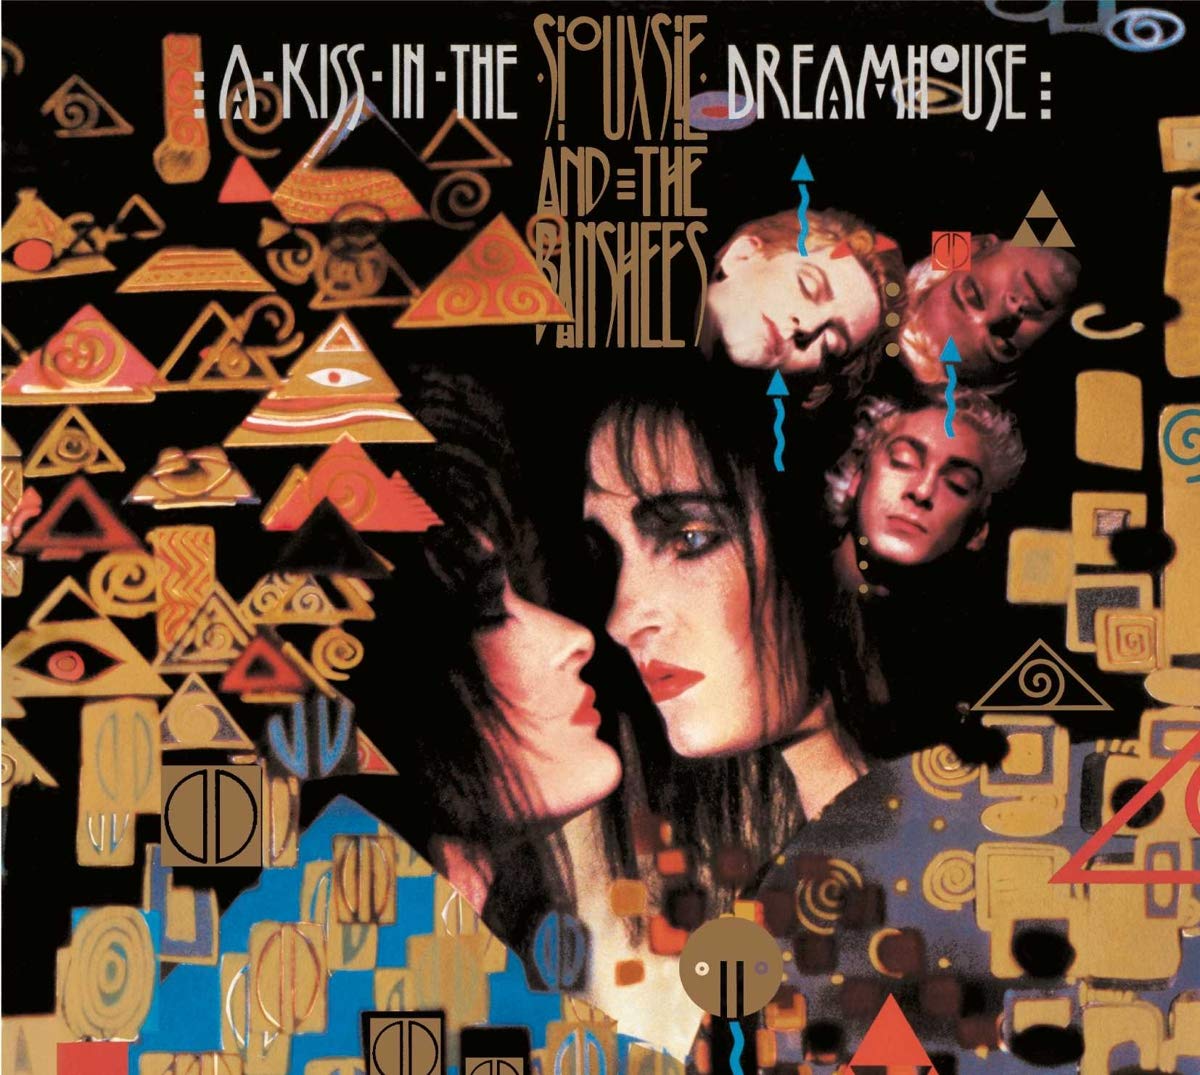 Siouxsie and The Banshees "A Kiss in the dreamhouse" LP